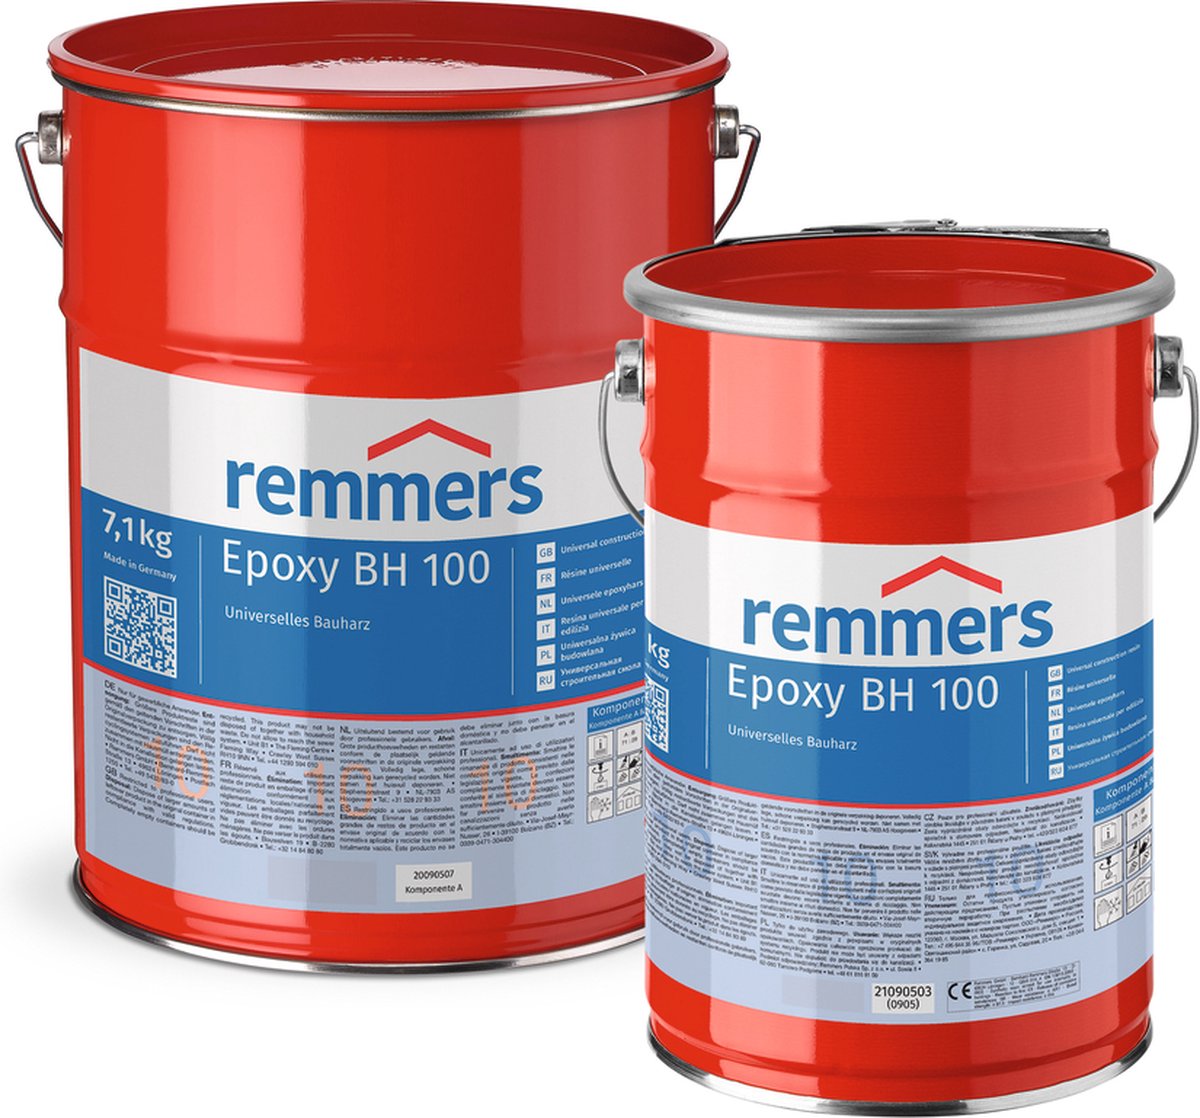 Remmers Epoxy BH 100 25 kg